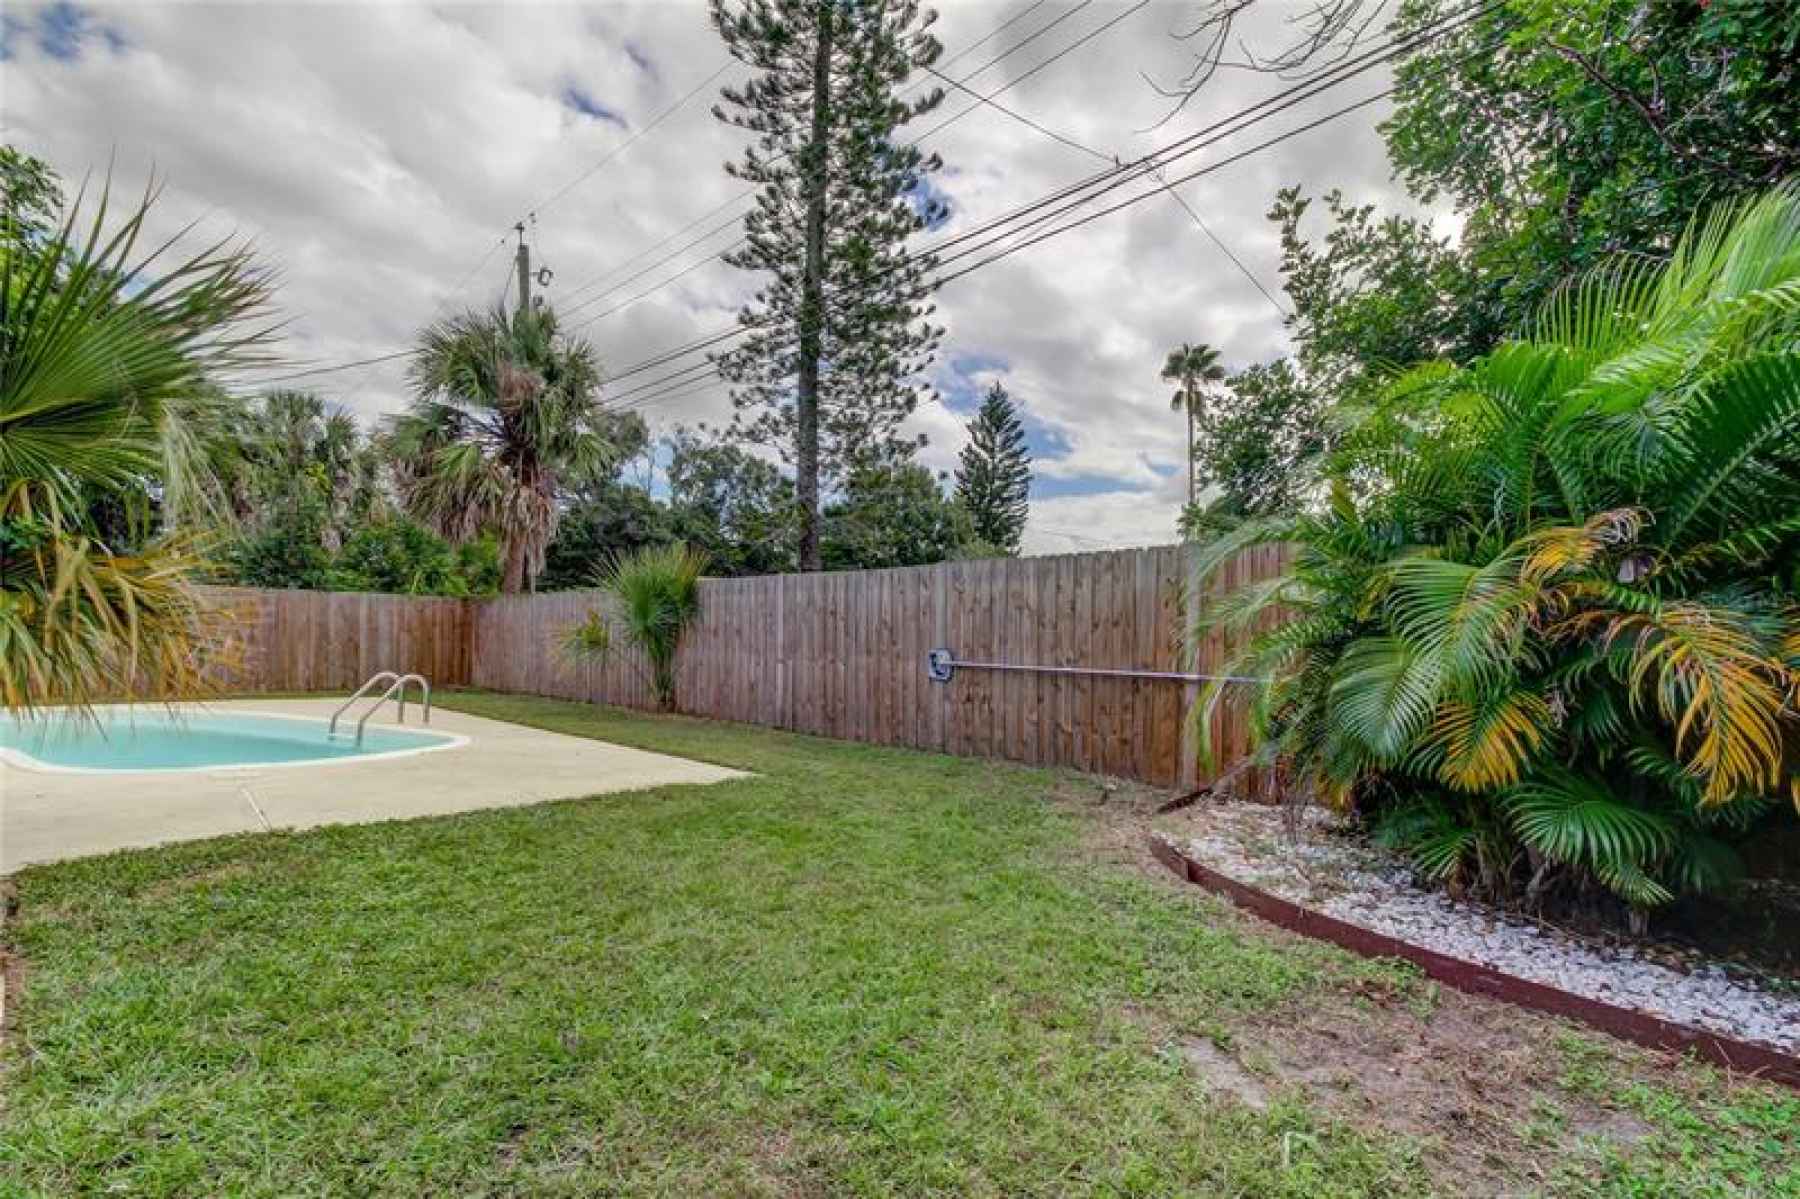 Spacious backyard with grassy area for your pets